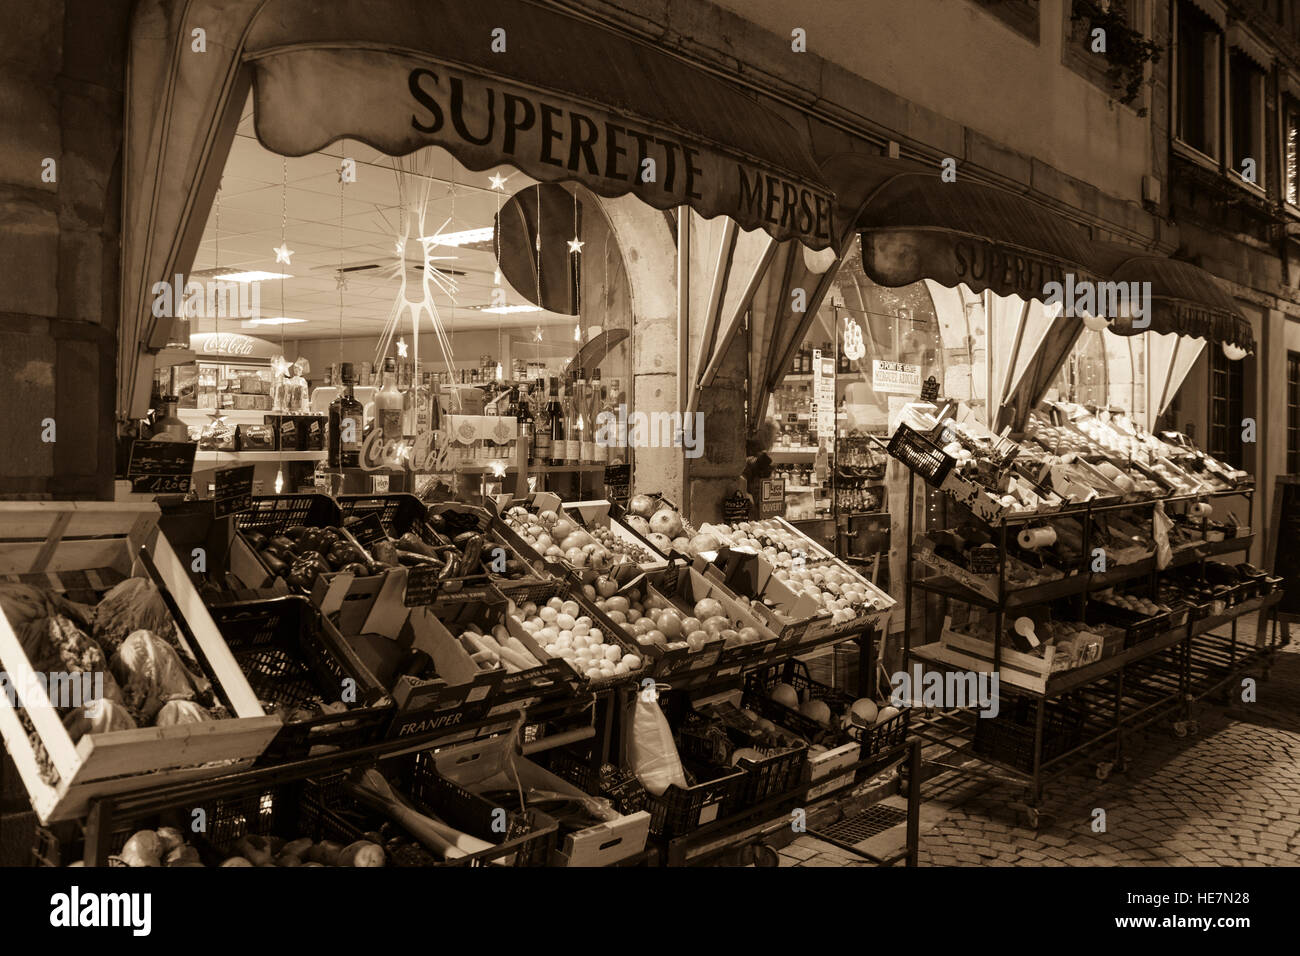 A sepia tone image of Superette Mersel, Strasbourg Stock Photo